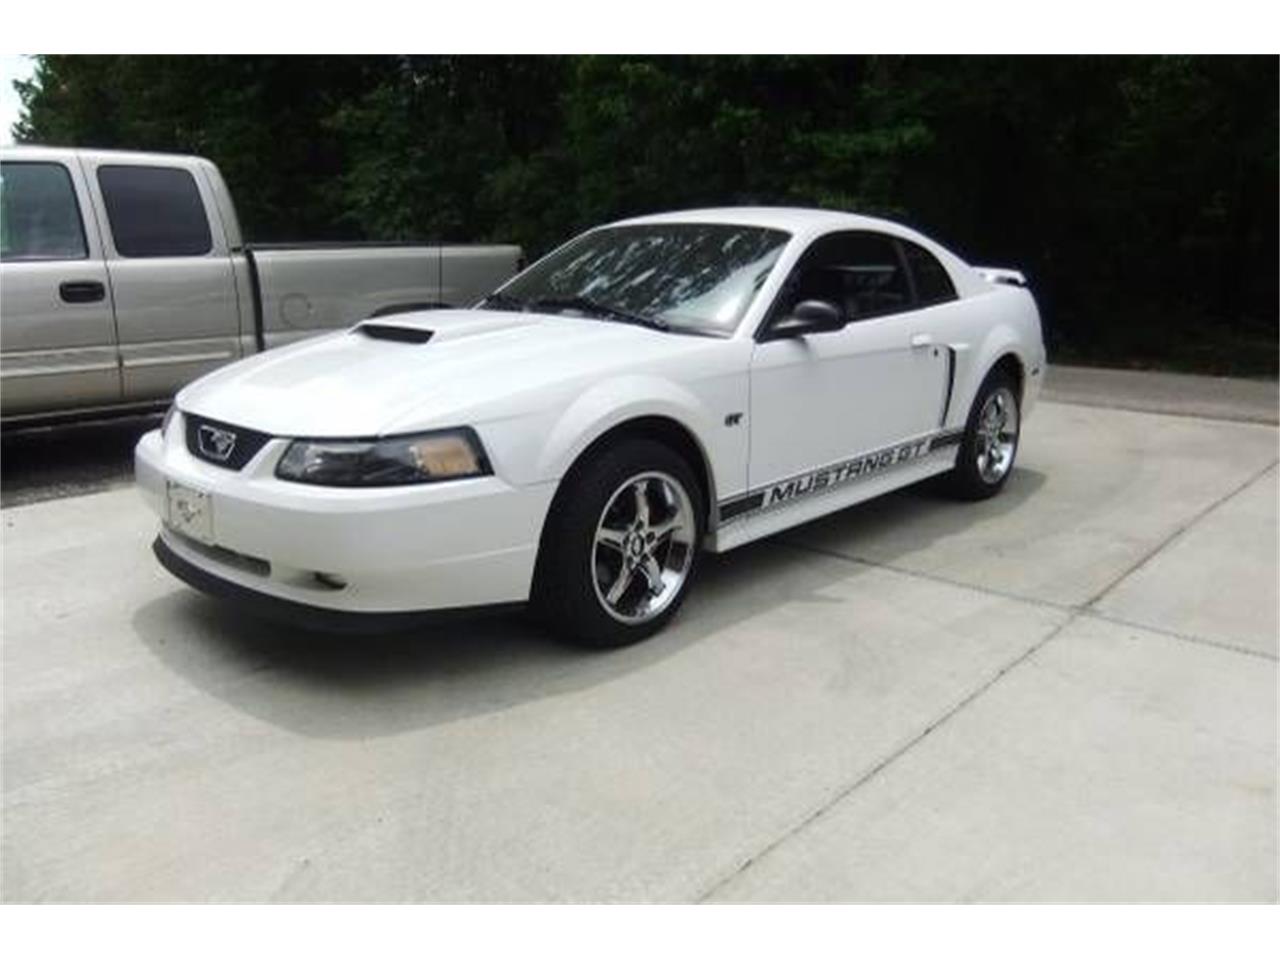 2001 Ford Mustang for Sale | ClassicCars.com | CC-1146043